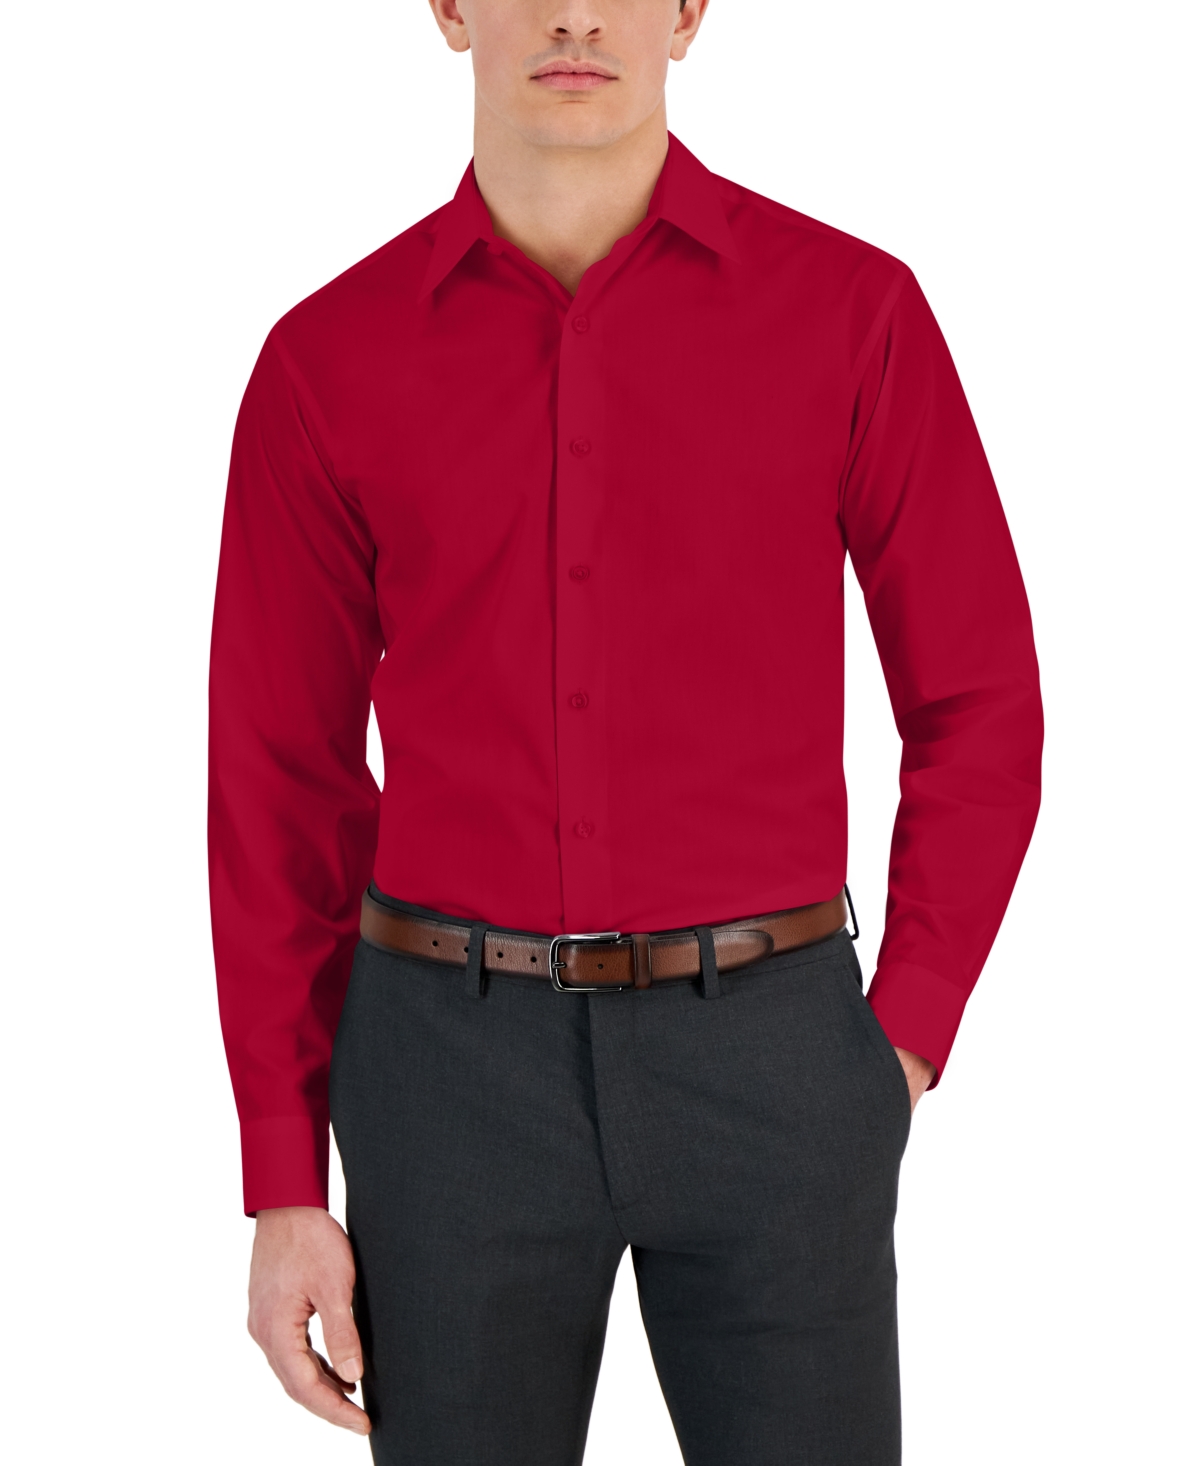 Men's Regular-Fit Solid Dress Shirt, Created for Macy's - Jester Red